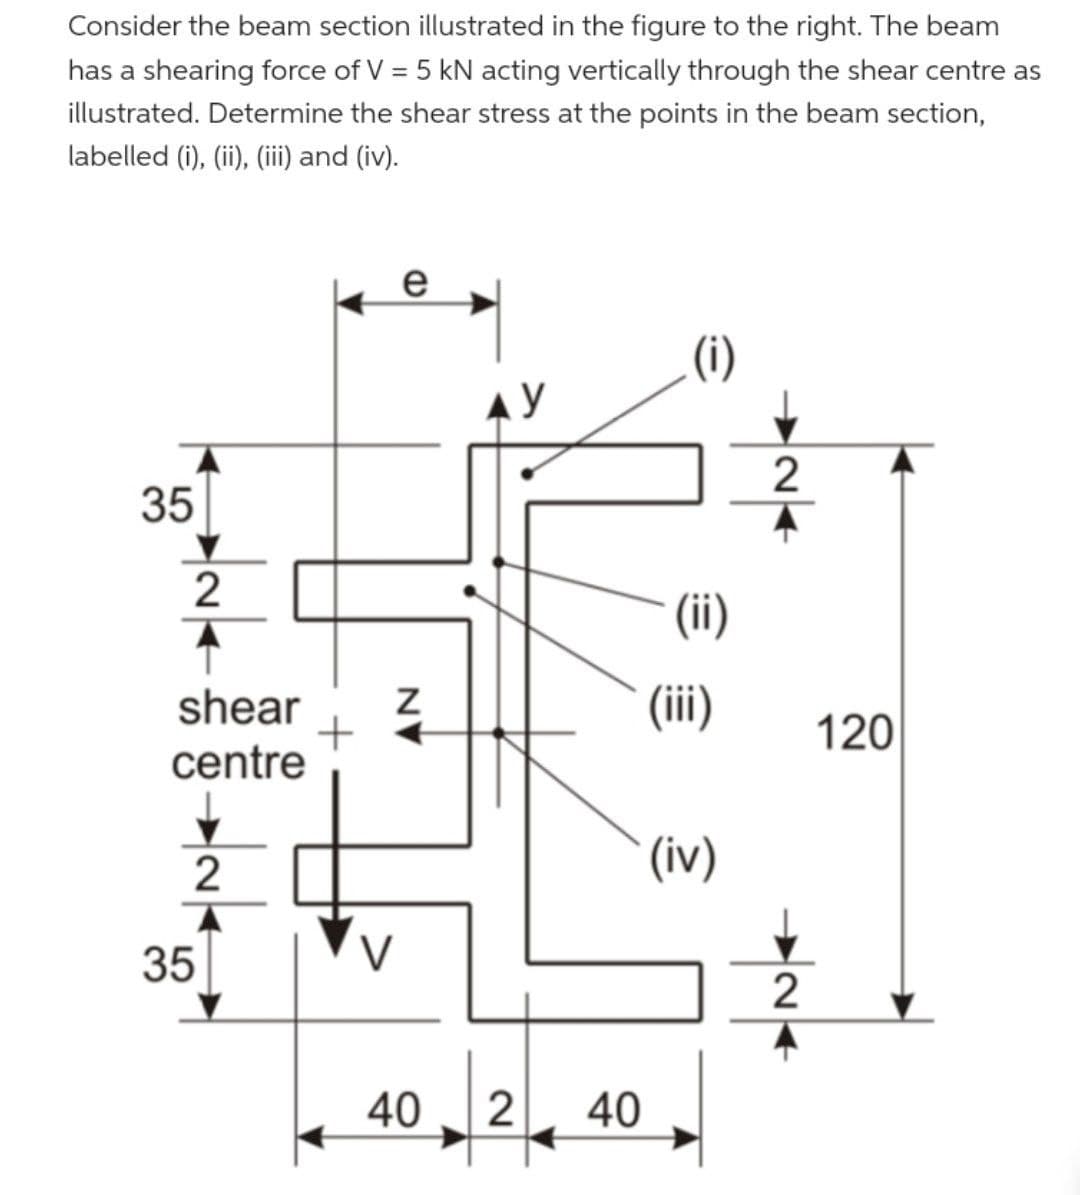 Consider the beam section illustrated in the figure to the right. The beam
has a shearing force of V = 5 kN acting vertically through the shear centre as
illustrated. Determine the shear stress at the points in the beam section,
labelled (i), (ii), (iii) and (iv).
35
2
shear
centre
2
35
+
e
AN
V
AY
40 2
40
(ii)
(iii)
(iv)
2
2
120